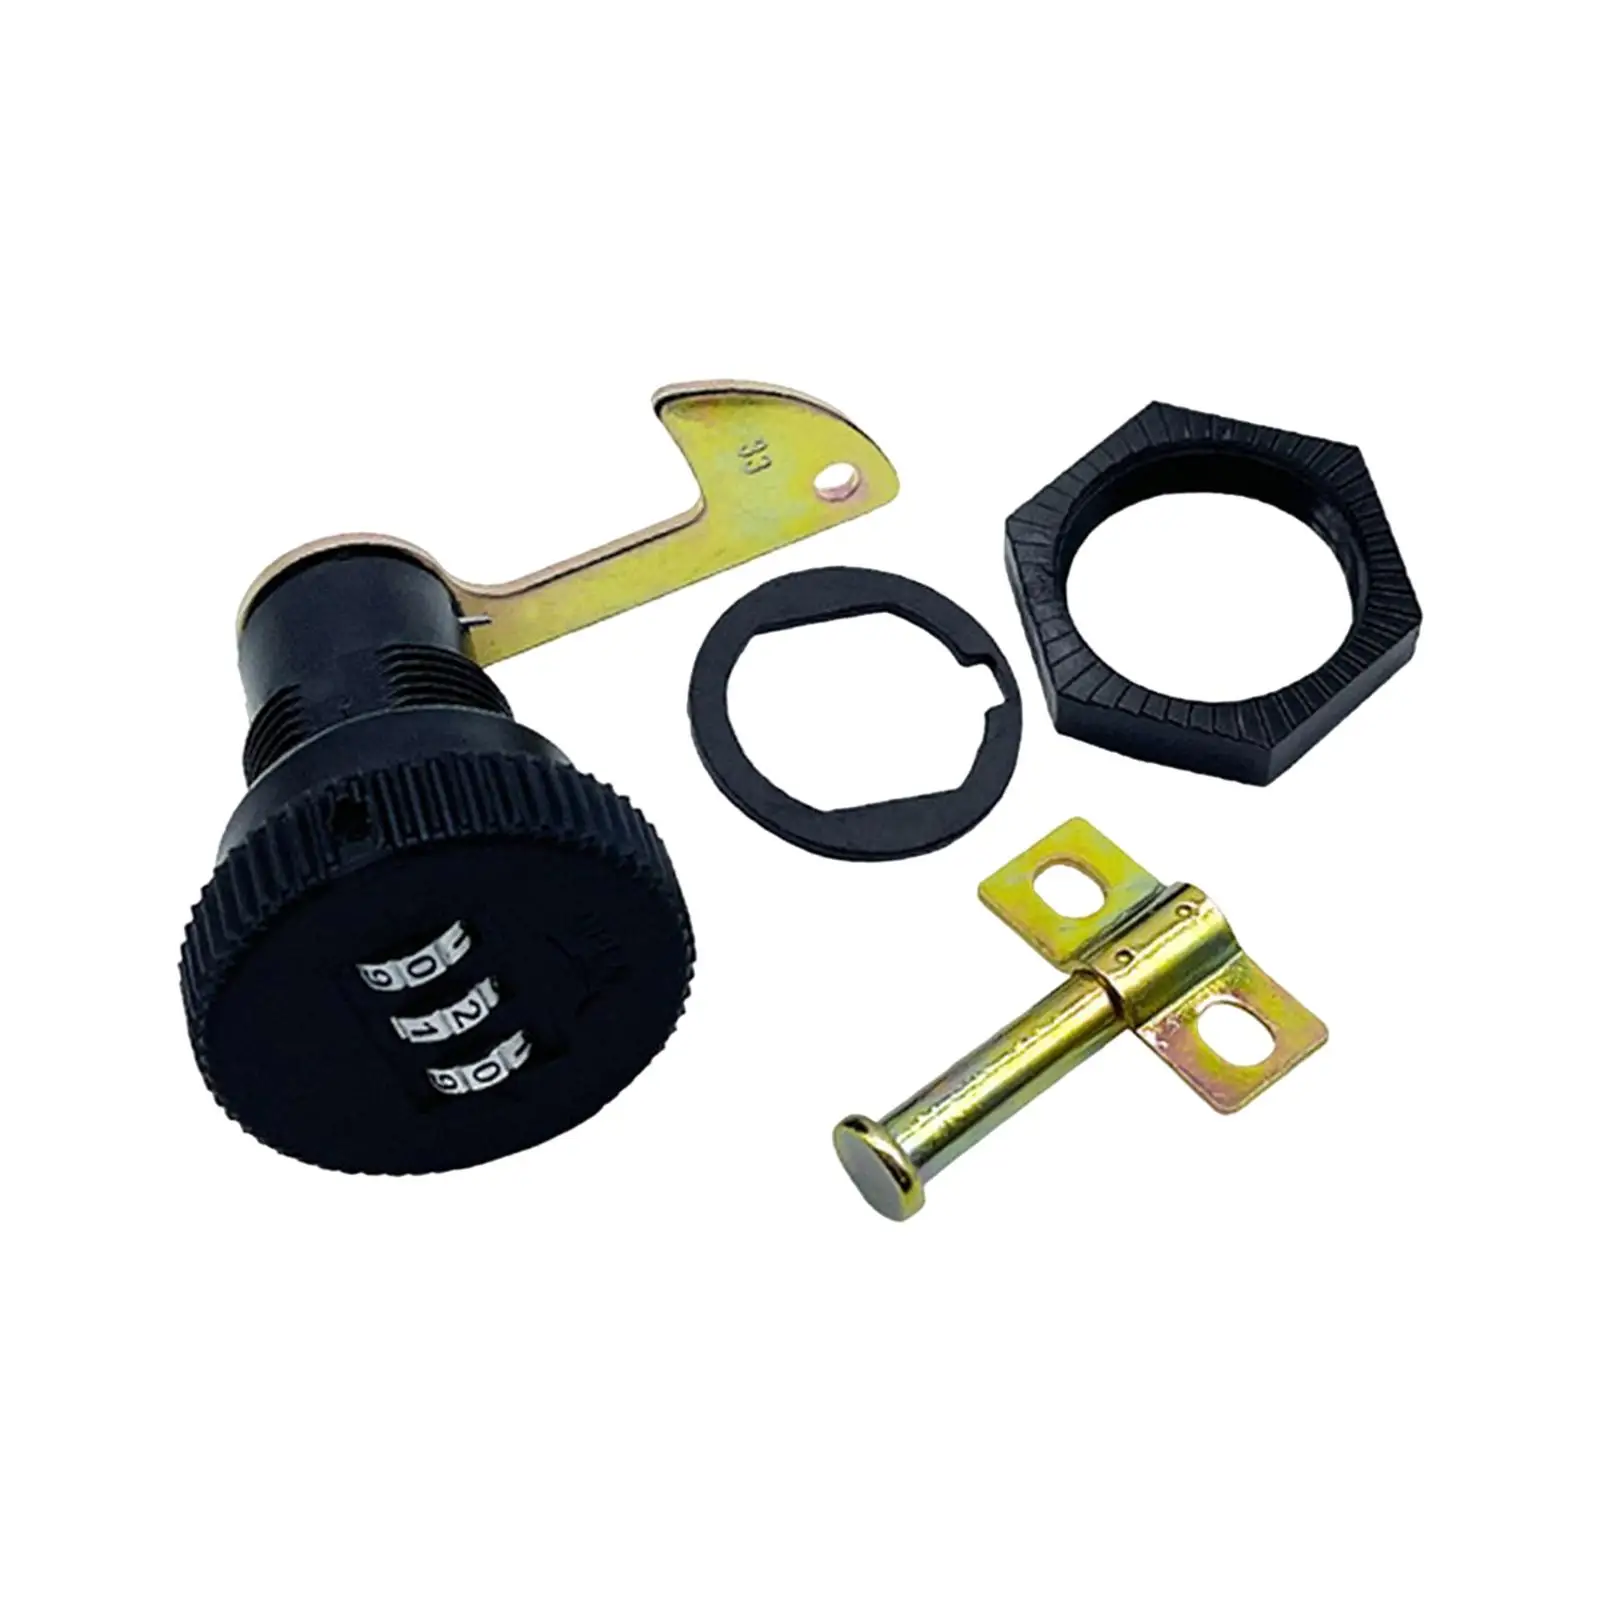 Password Code Lock 3 Digit for Motorbike Rear Trunk Easily Install Sturdy Professional